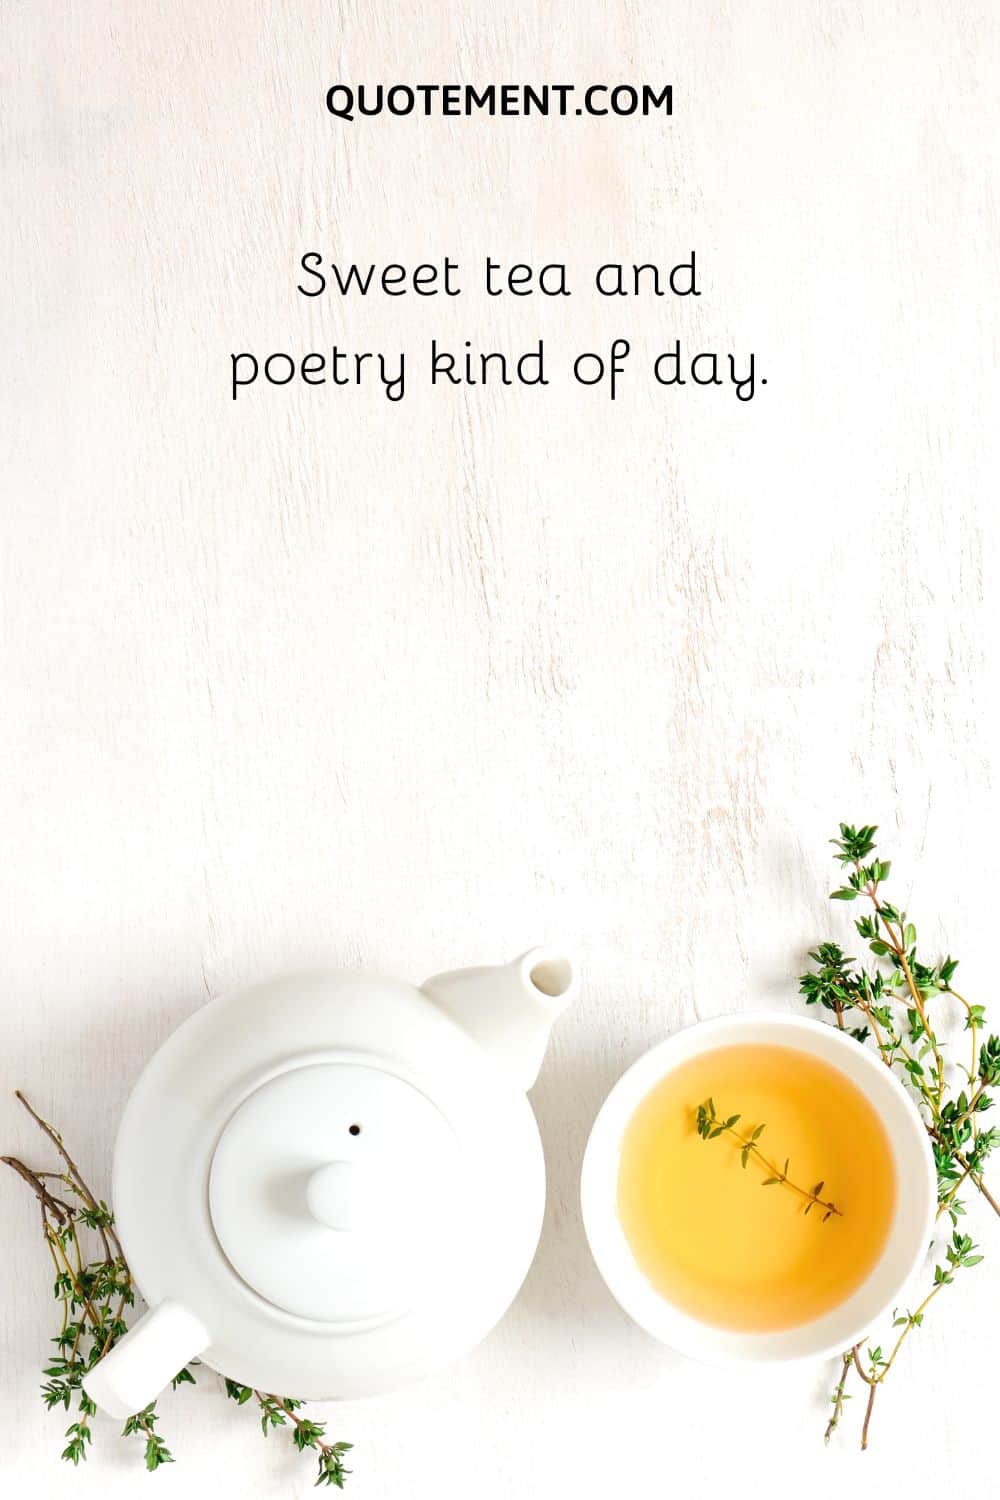 Sweet tea and poetry kind of day.